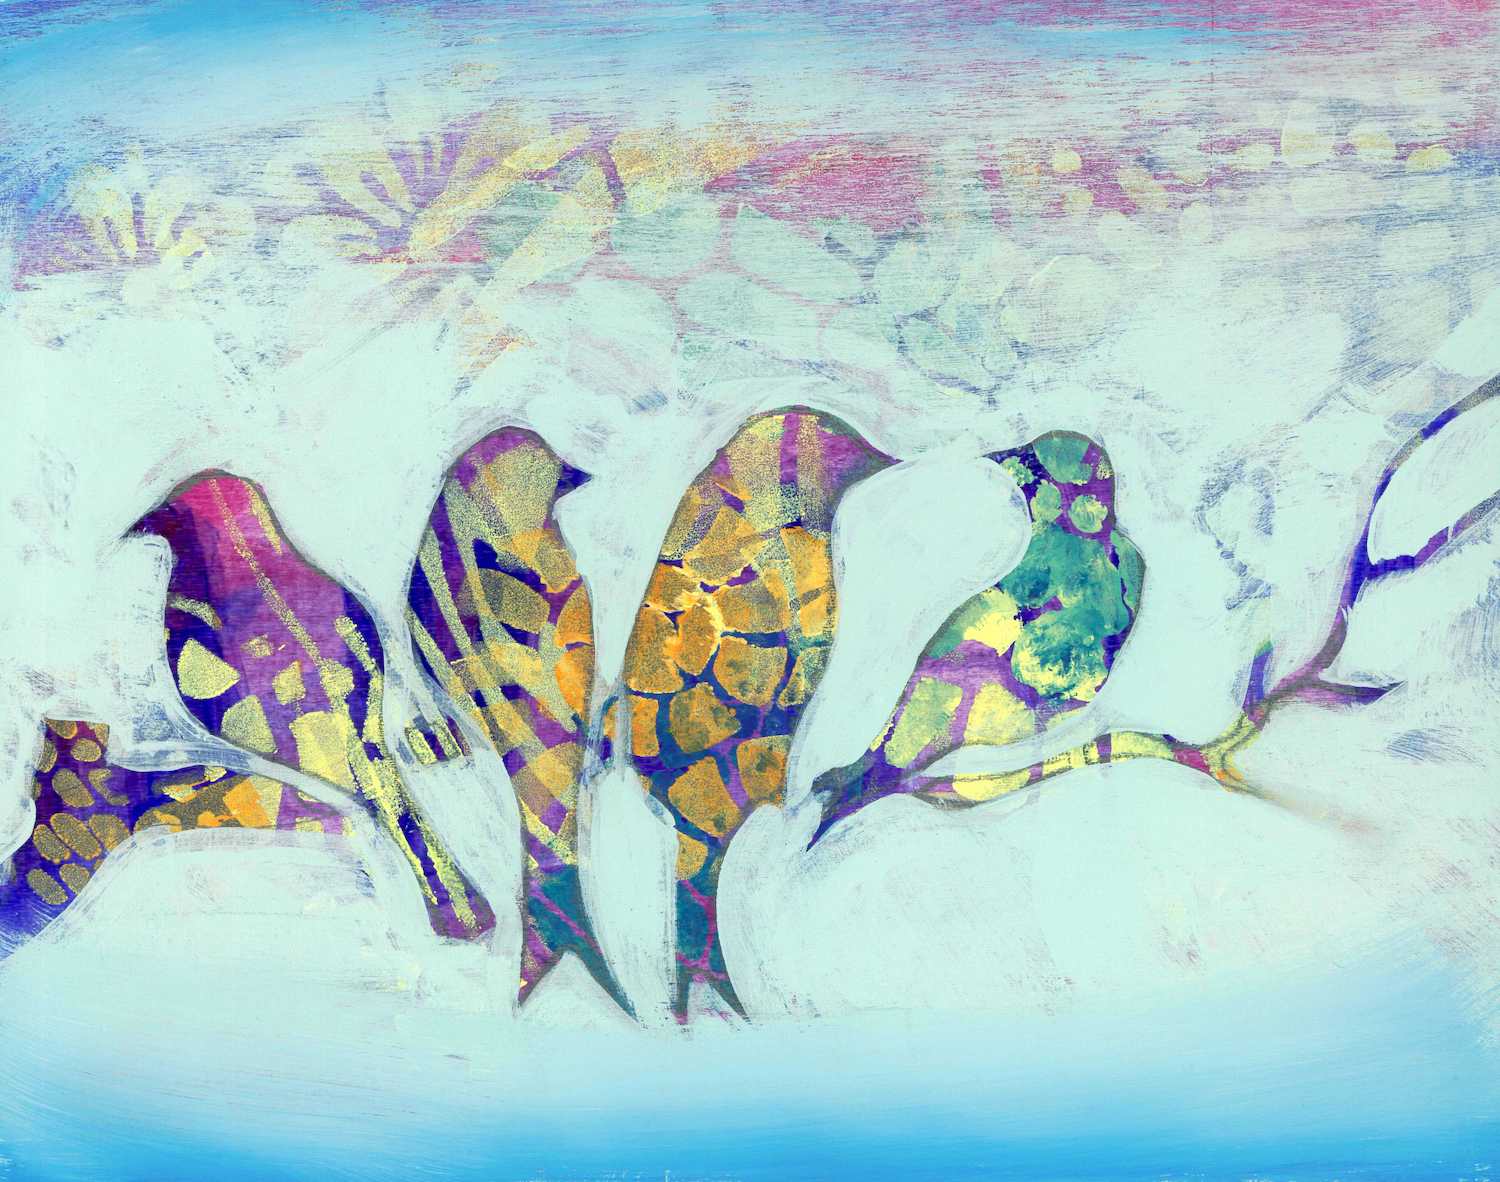 An acrylic painting of colourful, patterned birds on a light blue ombre background.